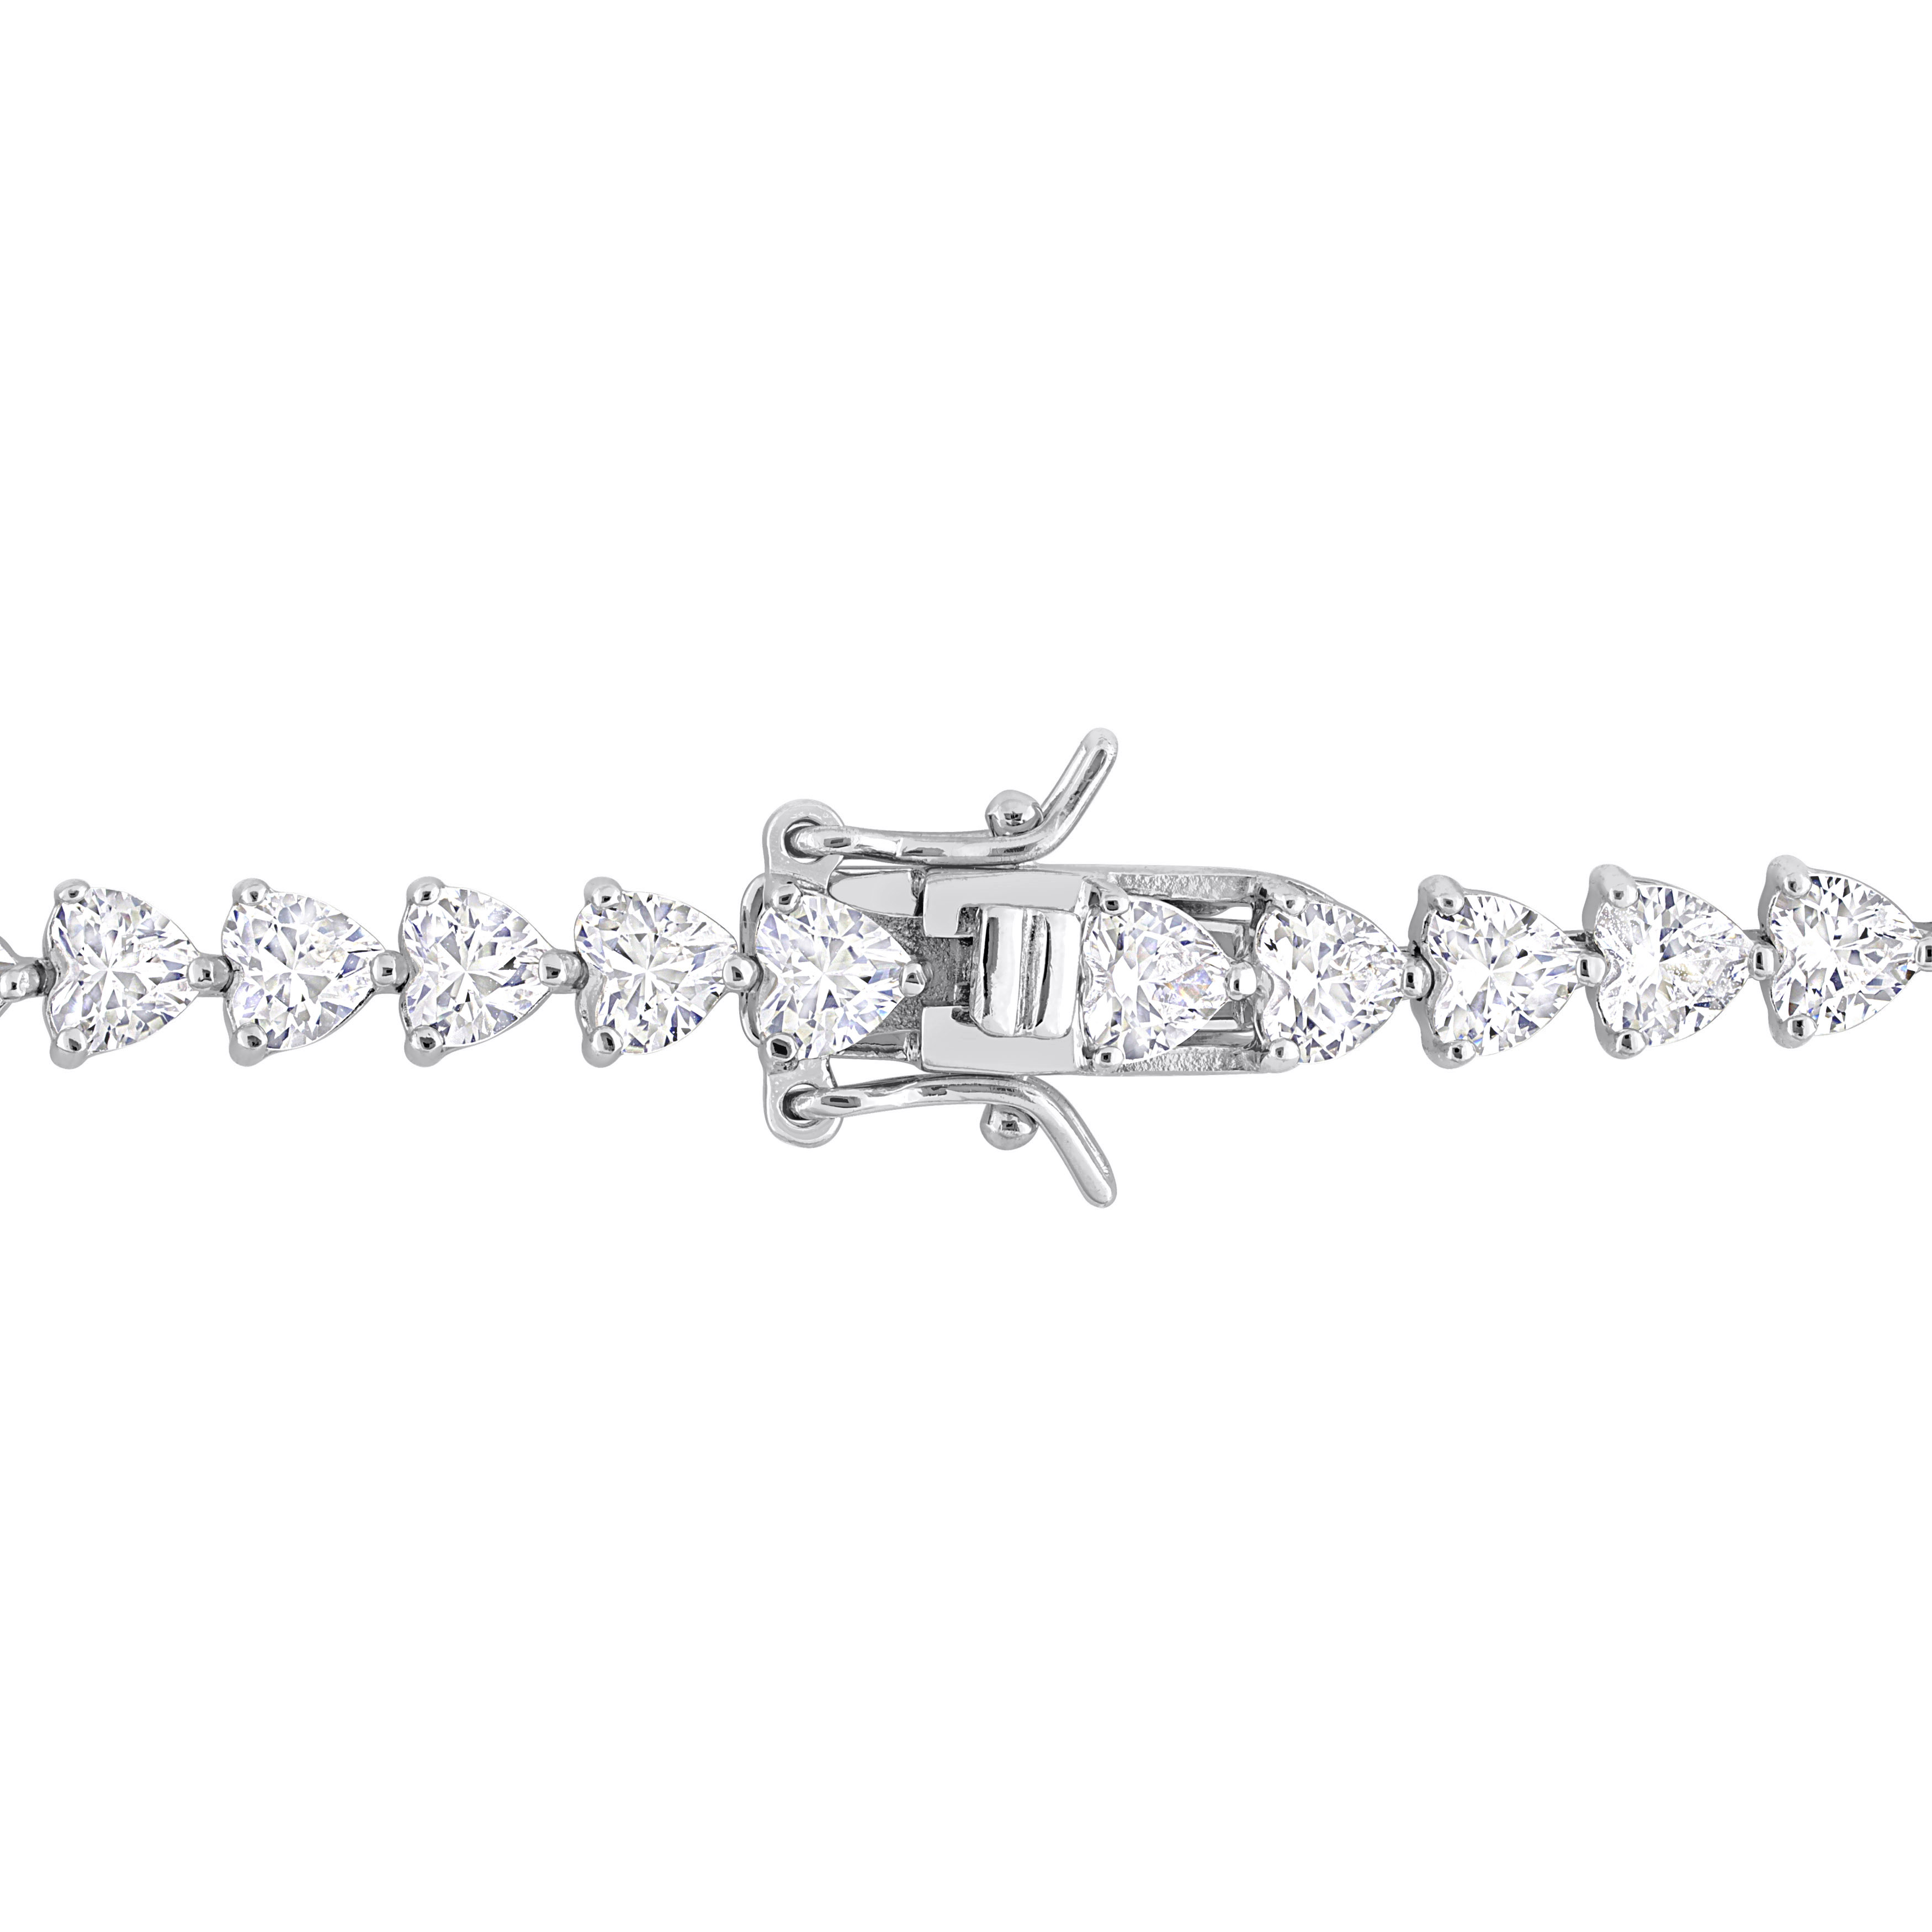 10 CT TGW Created White Sapphire 7.5 Bracelet in Sterling Silver